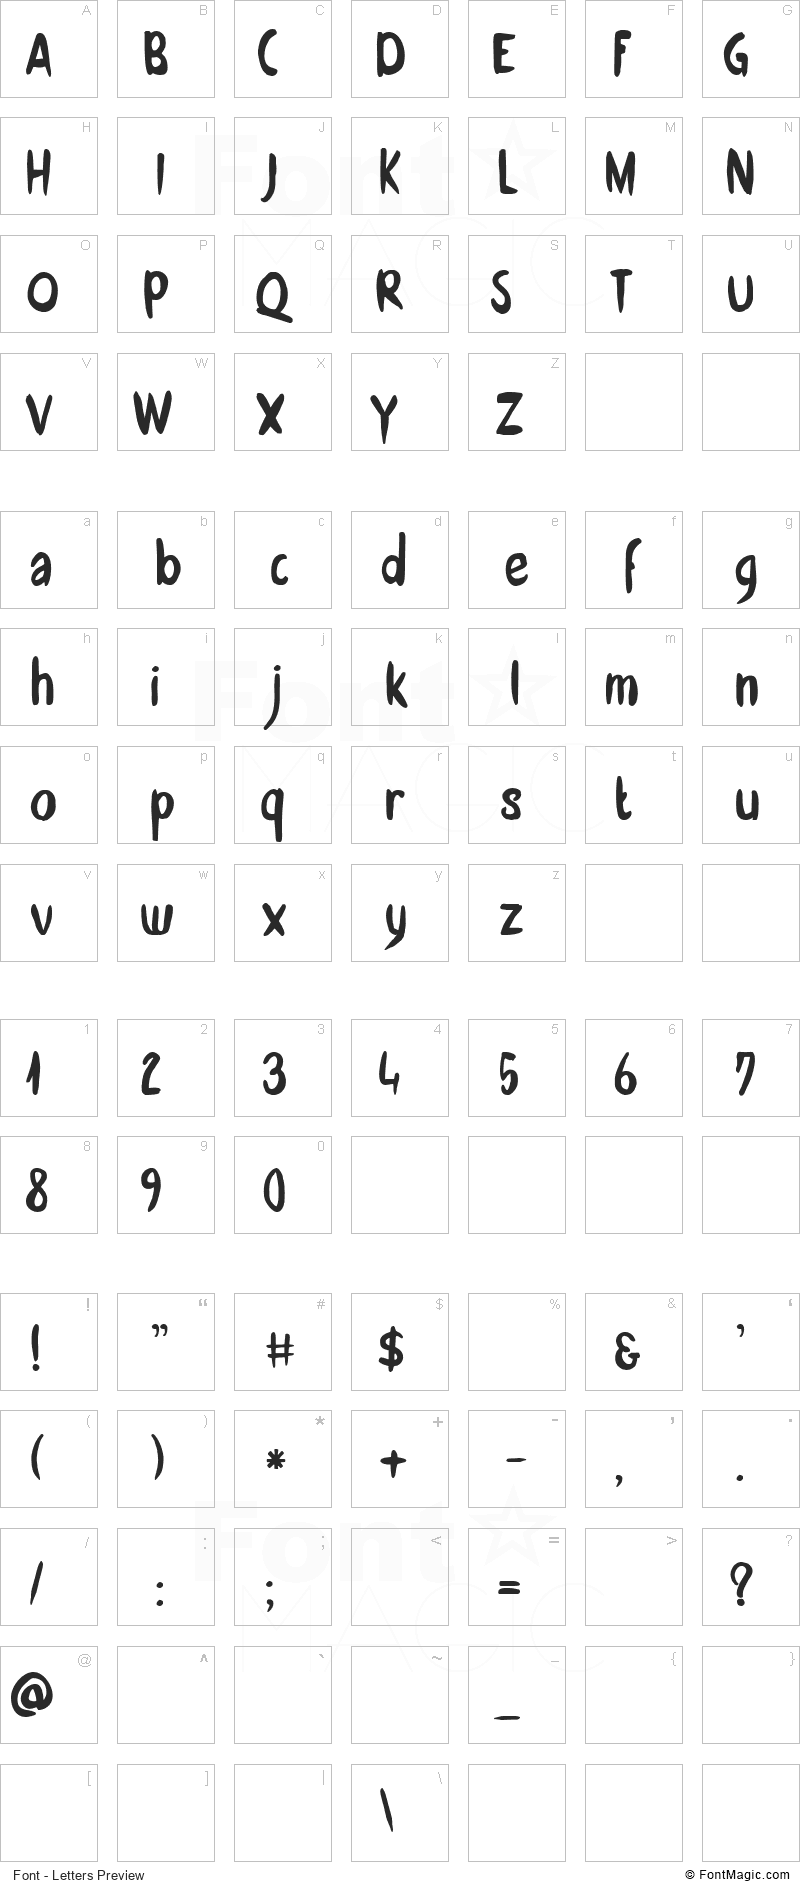 DK Zonnig Font - All Latters Preview Chart